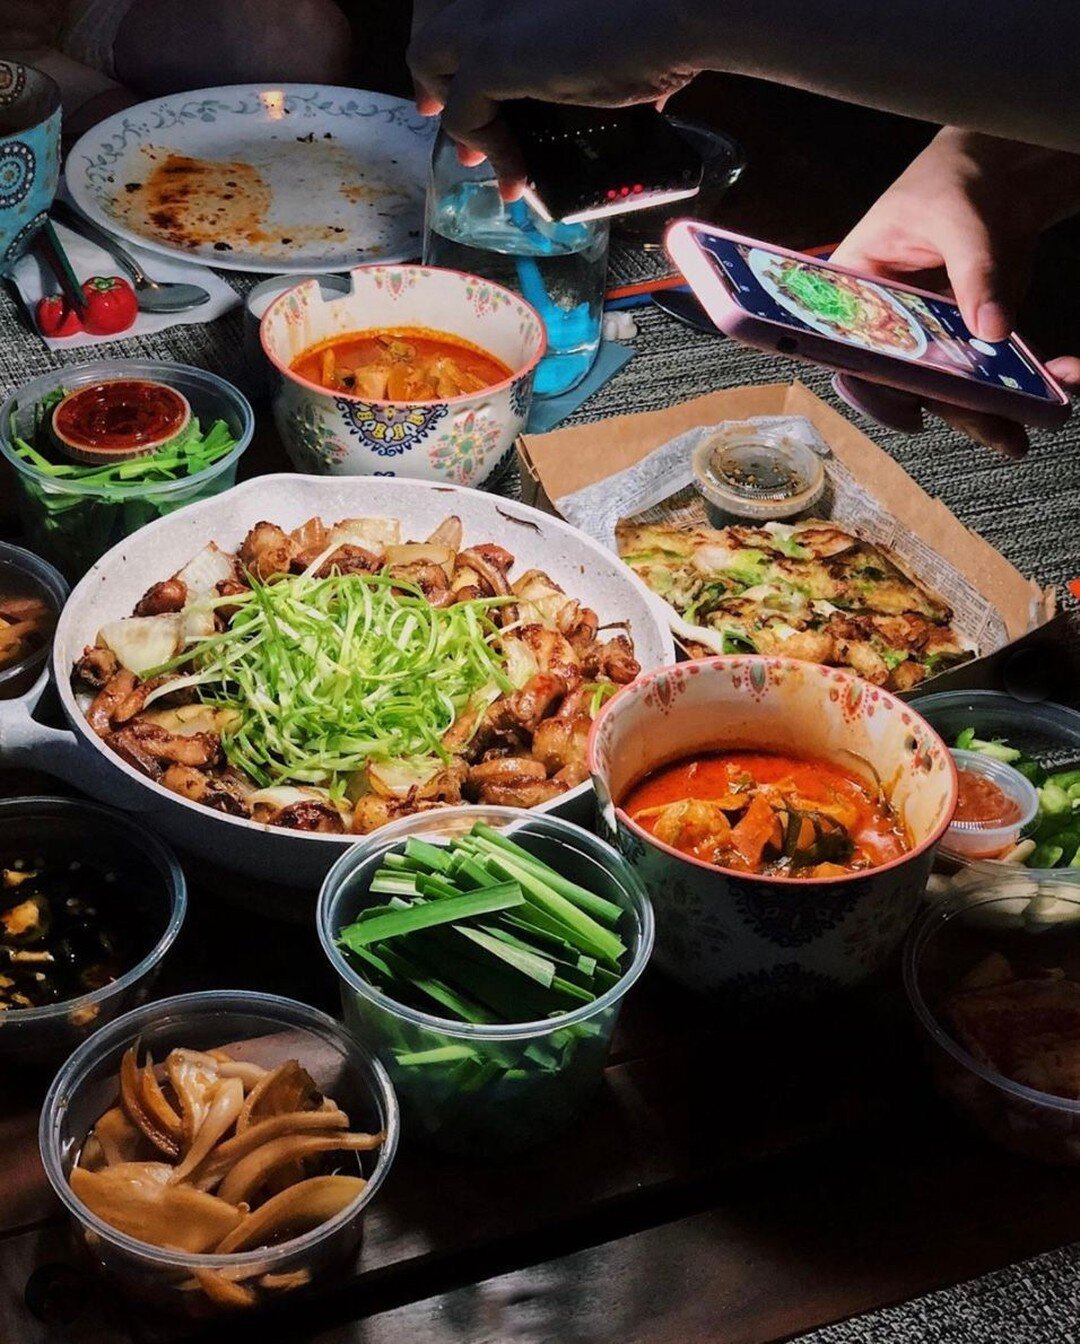 Thank god it's Friday! Save yourself time for food prepping, cooking, and cleaning with ordering special set menus from Gopchang Story BBQ. Happy #Friyay!⠀
📷: Thanks for the awesome picture! @umieats⠀
&mdash;⠀
👆Order on our website(link in bio) and